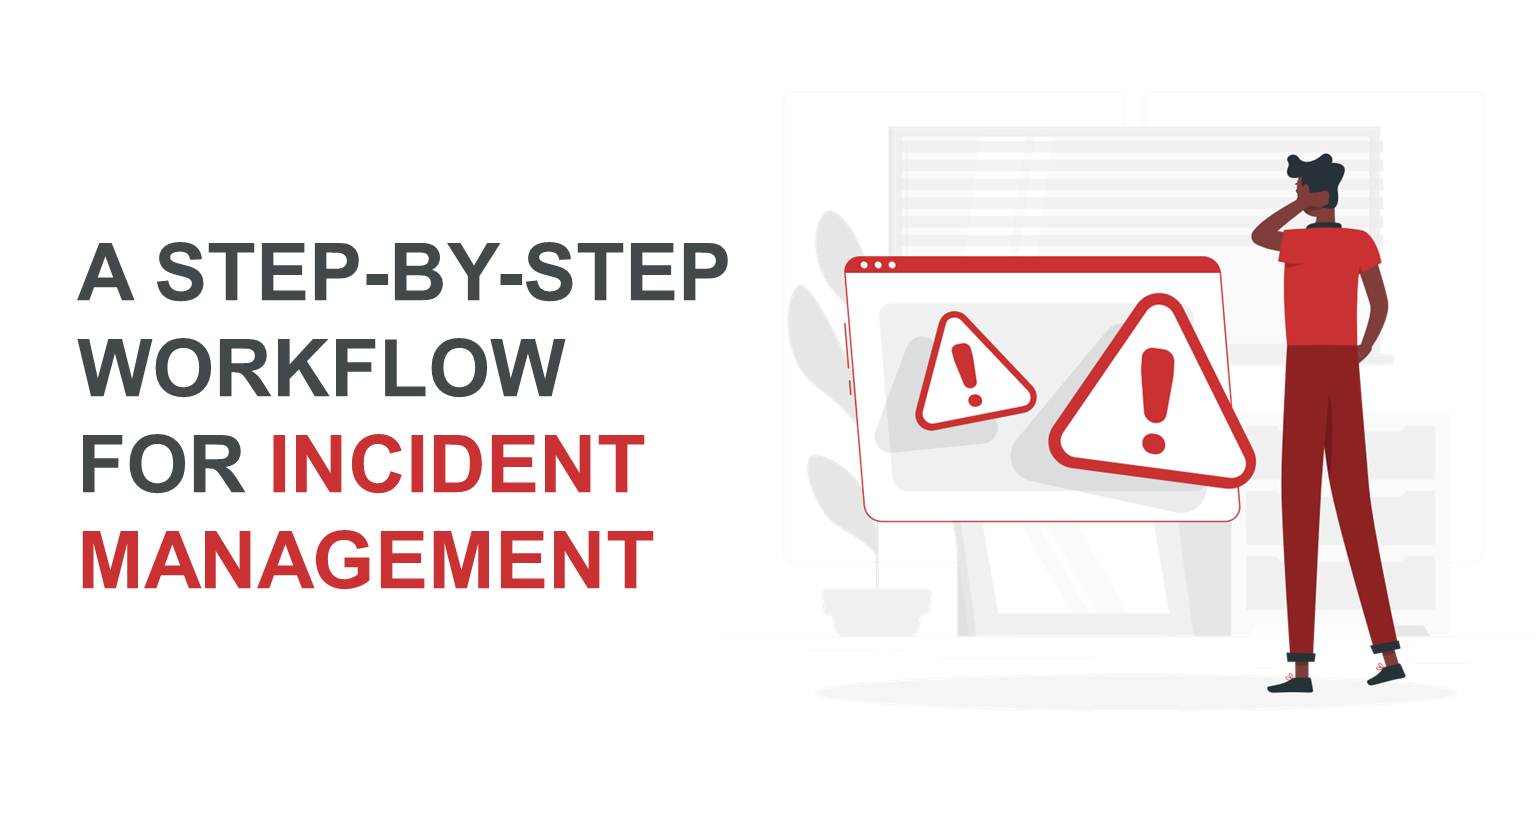 A Step-by-Step Workflow for Incident Management 